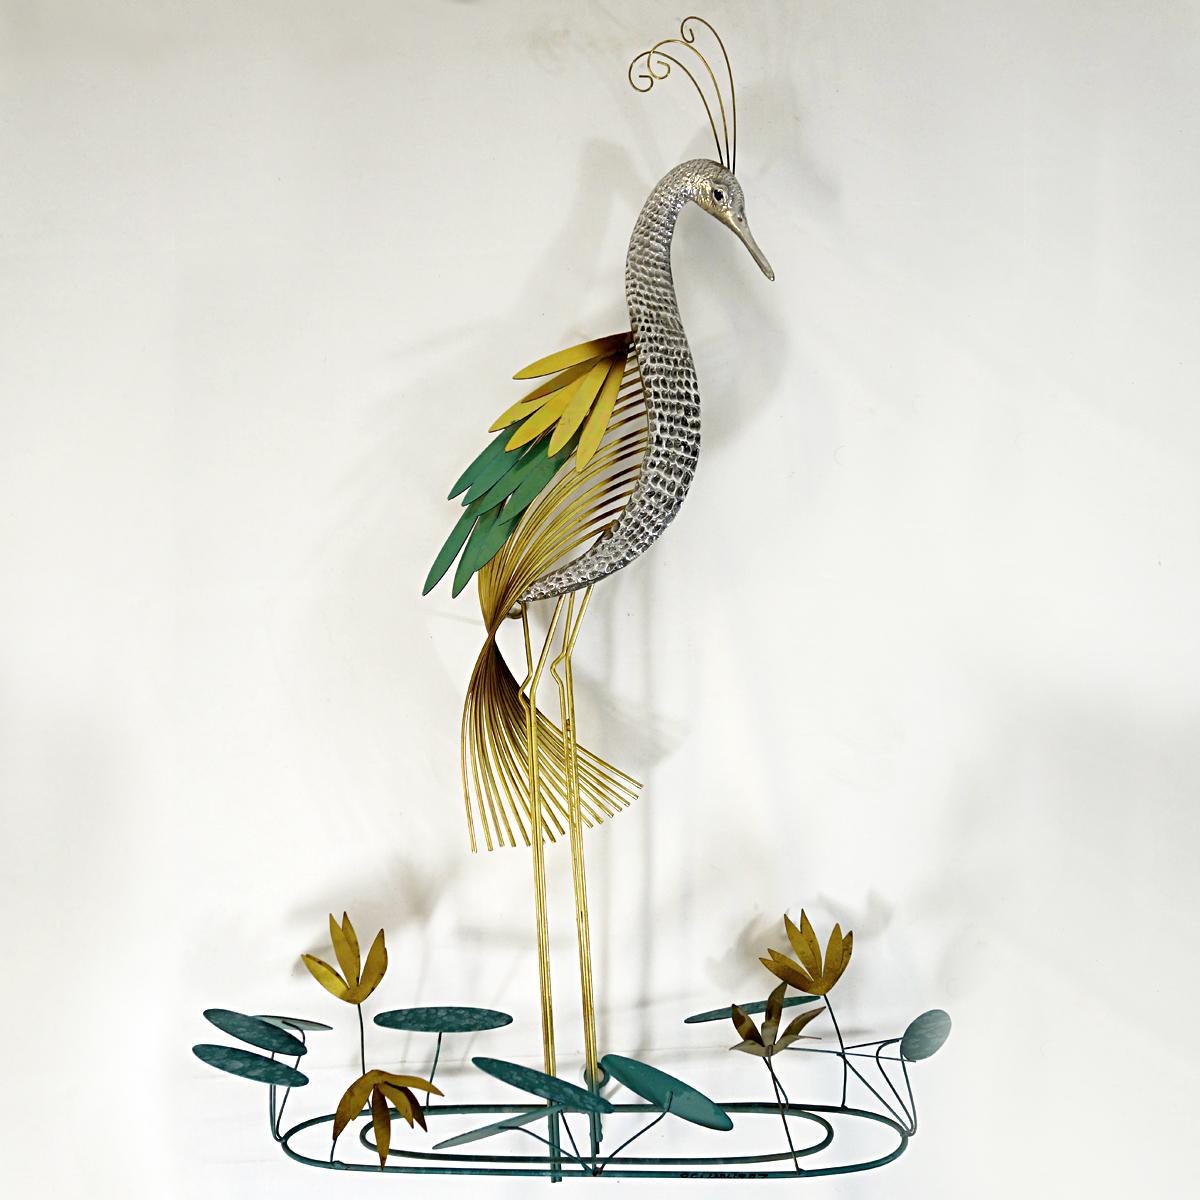 Gracious wall sculpture of a stylized silver heron or common crane designed by Curtis Jere and made by Artisan House. The object is made of brass with some patinated parts. 
Signed and dated 1987.